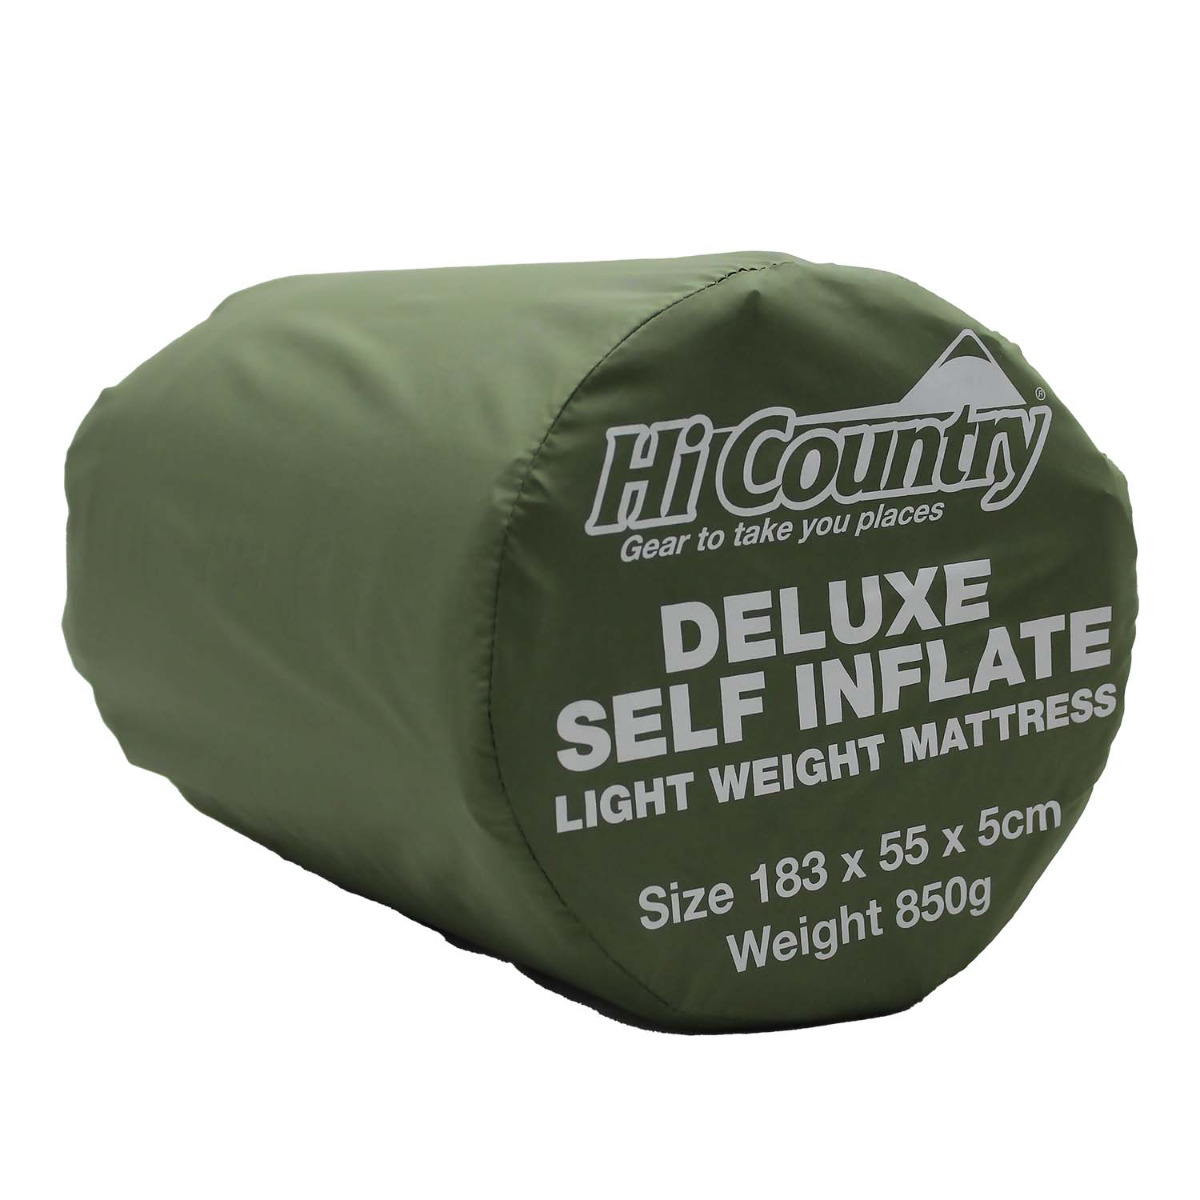 Hi-Country Deluxe Self Inflating Lightweight mattress